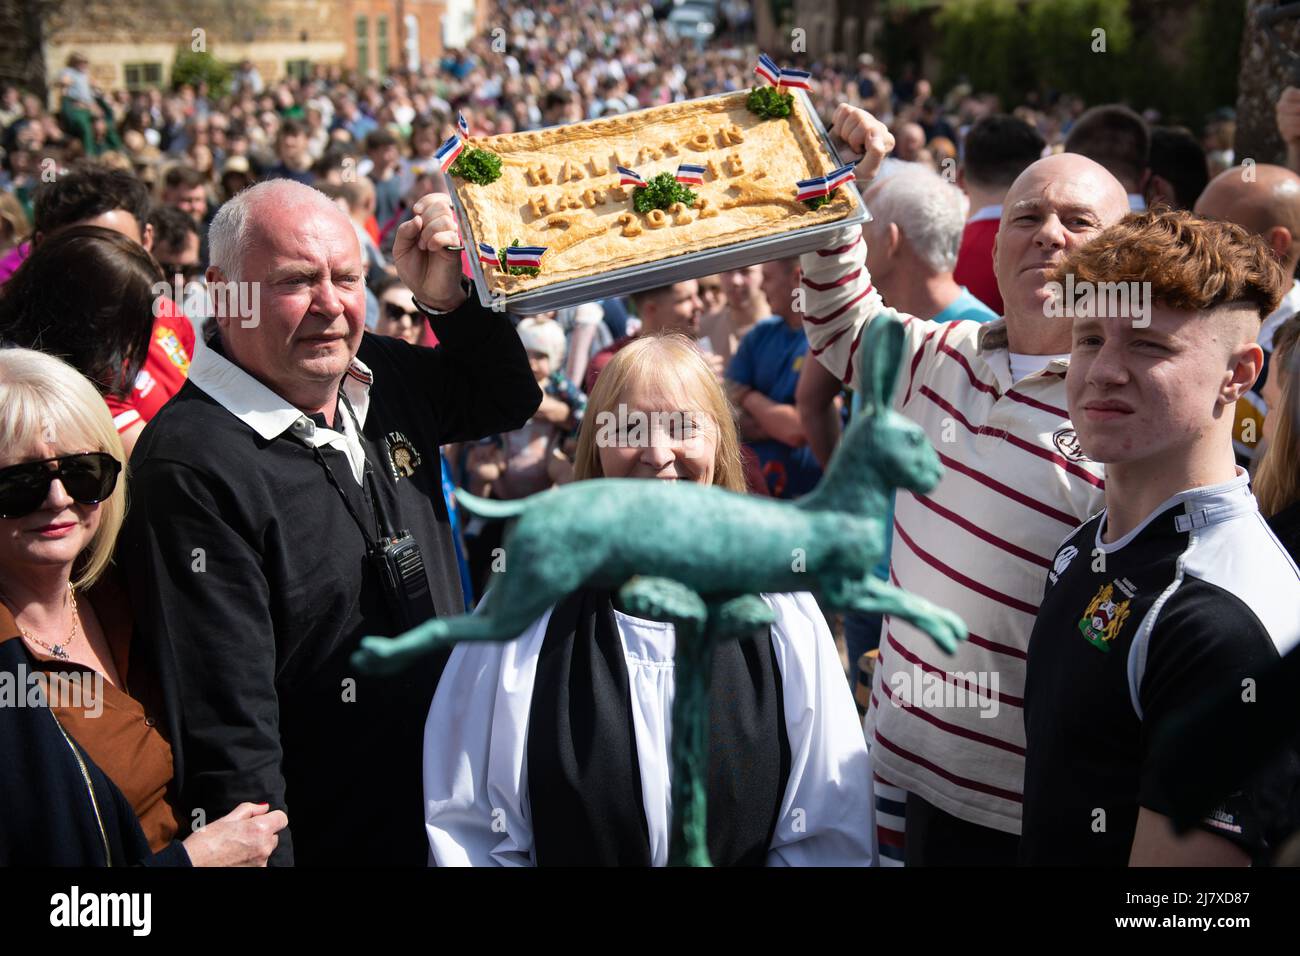 Hallaton, Leicestershire, UK. 18th April 2022. Pictured:The pie is blessed by the Hallaton vicar before being cut and thrown to the crowd for the ‘scr Stock Photo